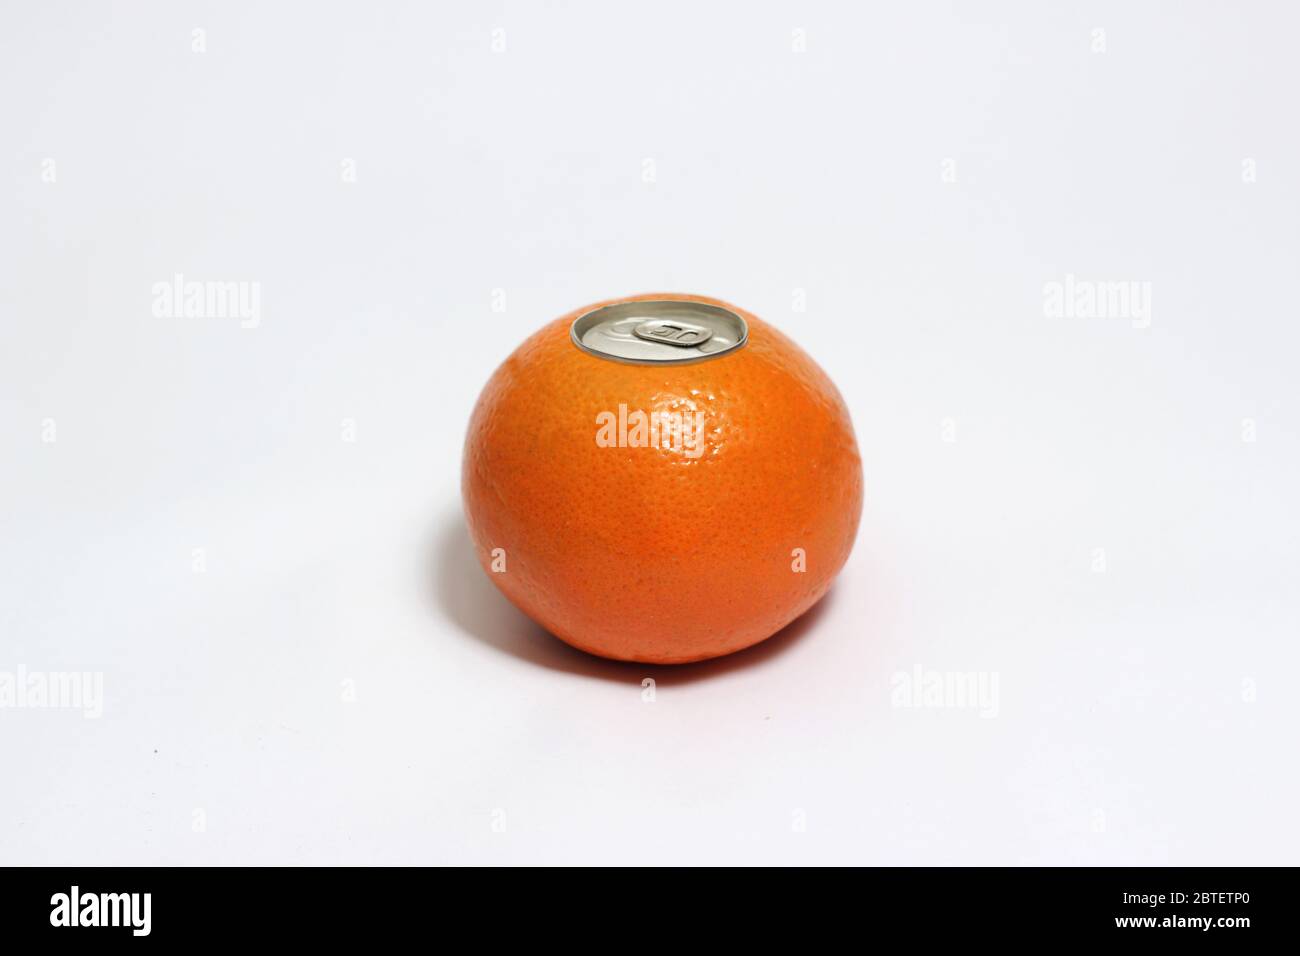 Fresh orange with pop up silver top of a can isolated on white background. Stock Photo